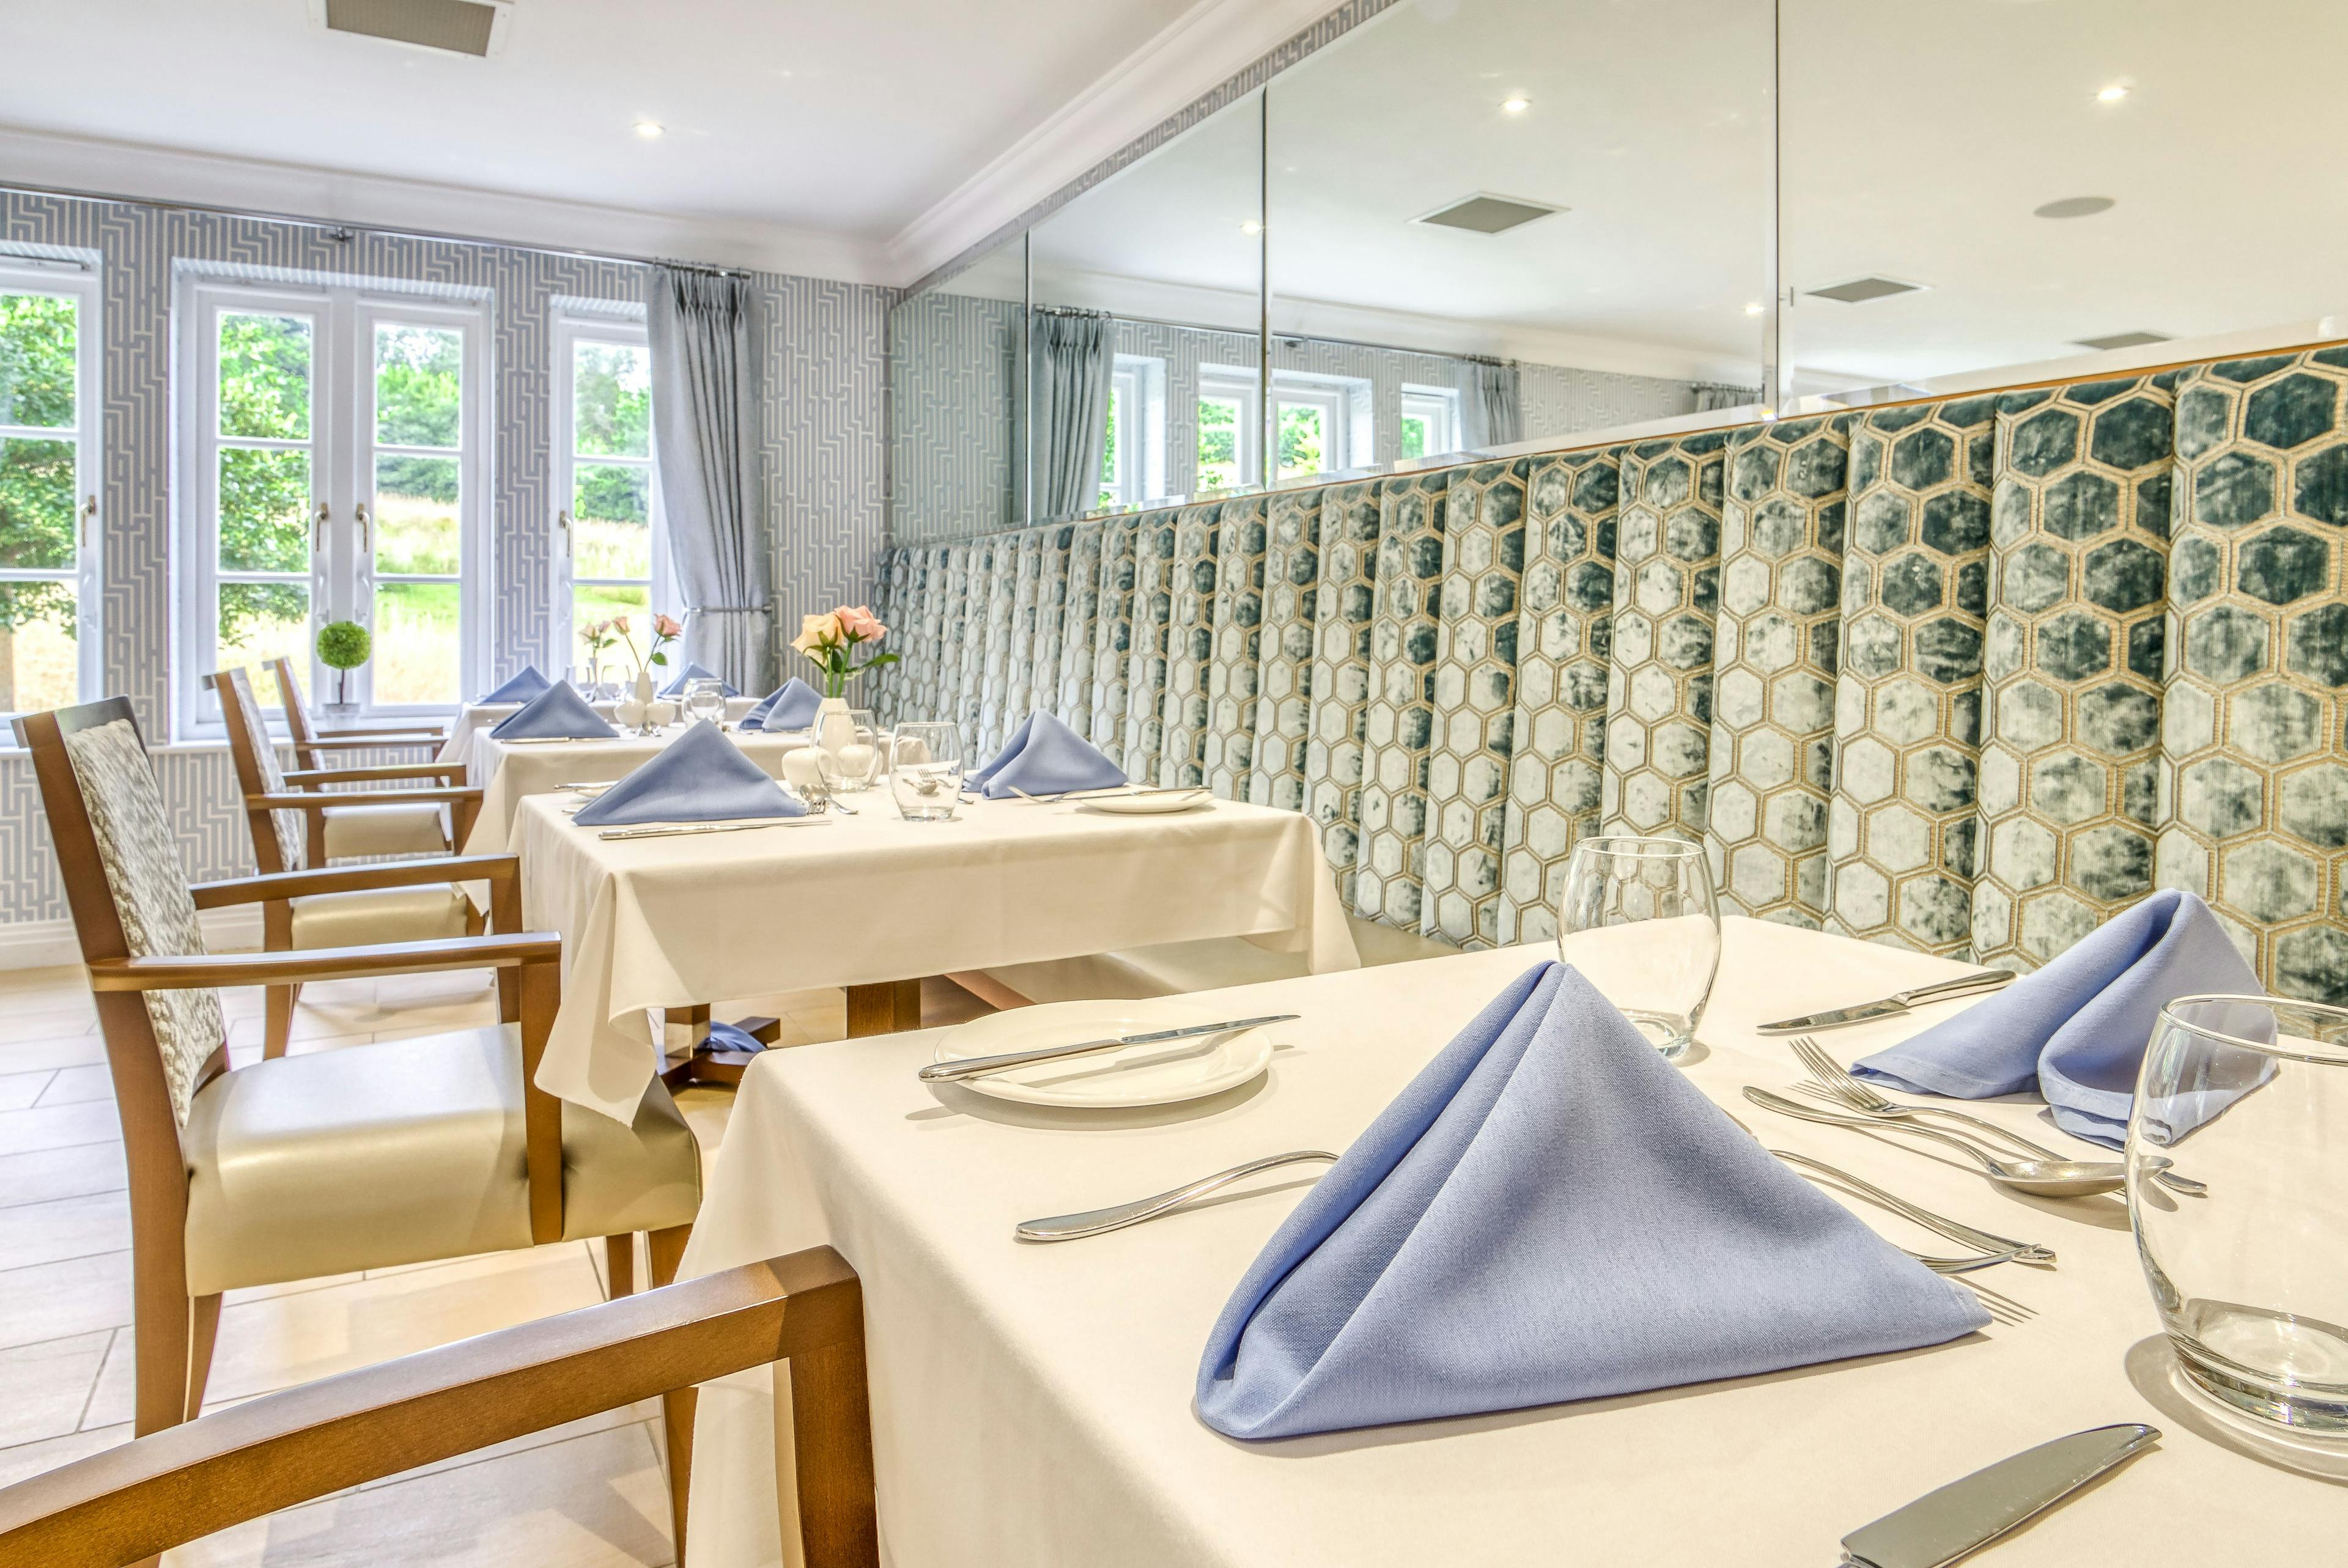 Dining area of Painswick care home in Painswick, Gloucestershire